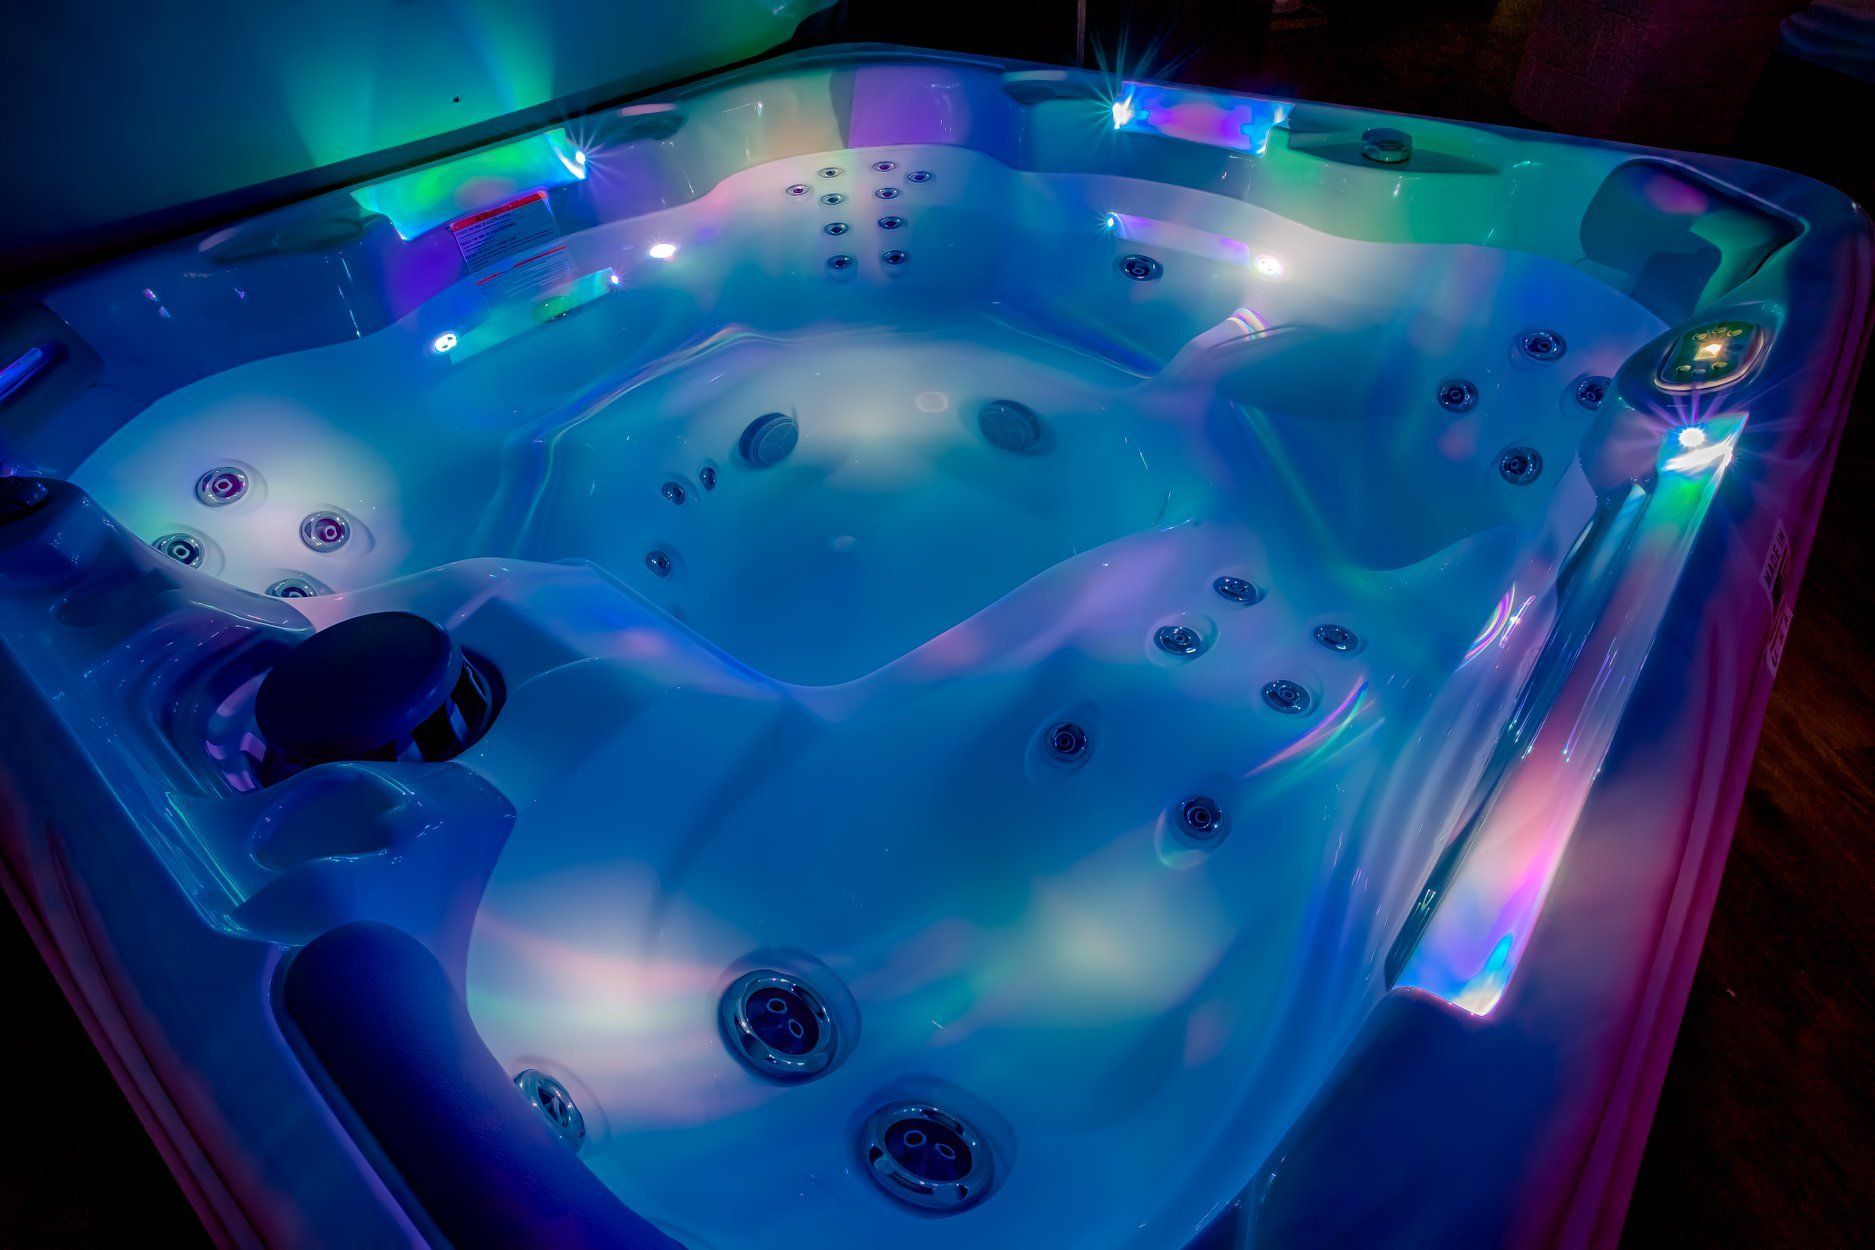 South Seas 729L Holiday let hot tub from Hot Tub Haven